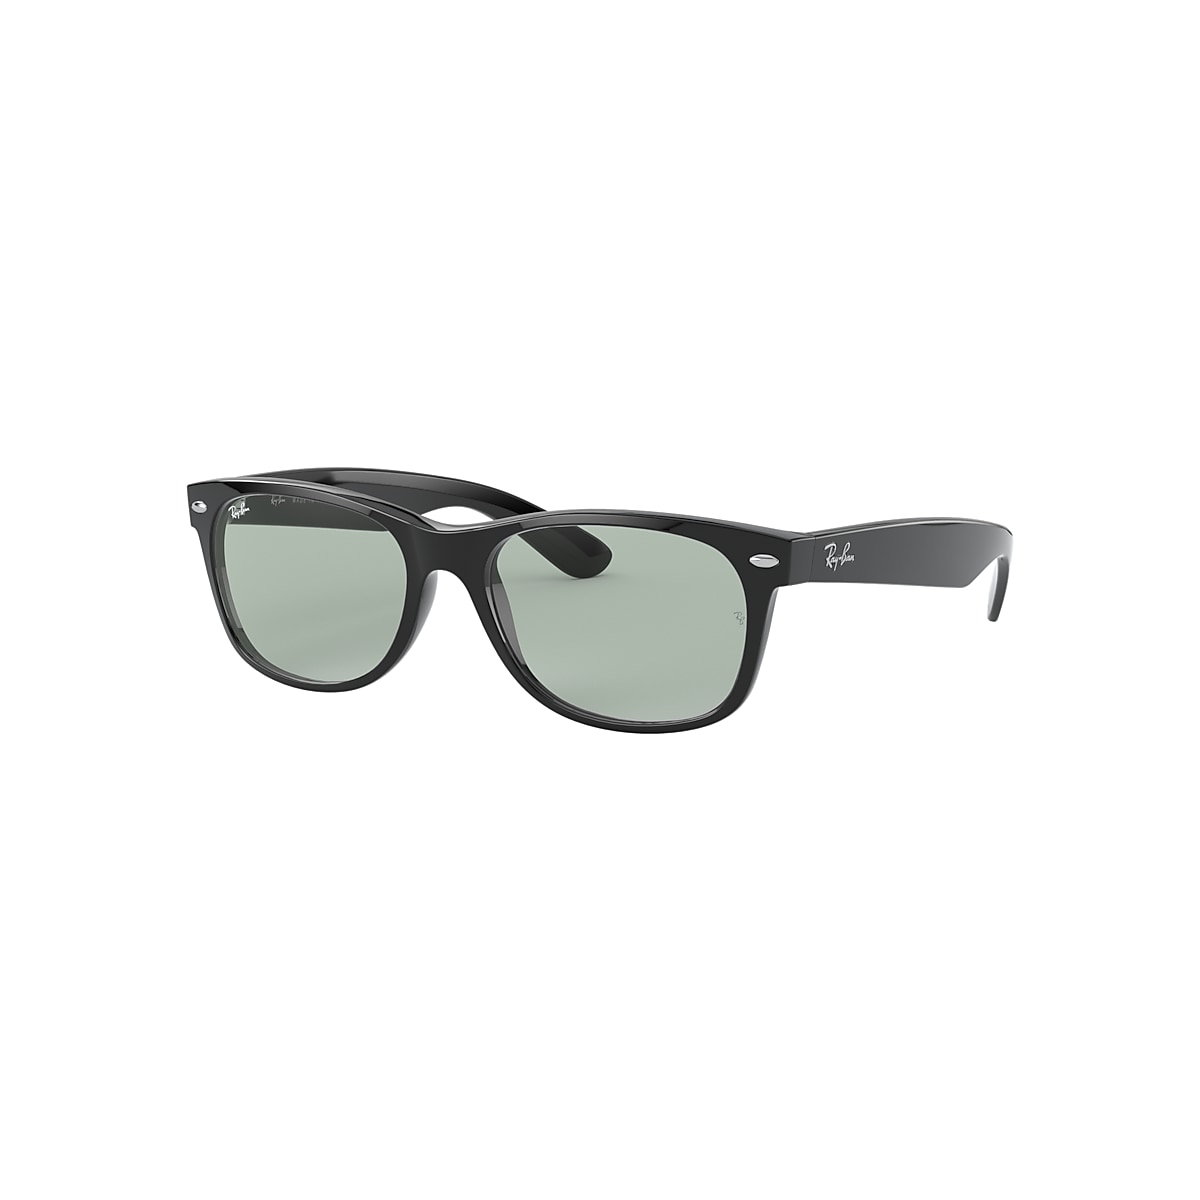 NEW WAYFARER WASHED LENSES Sunglasses in Black and 